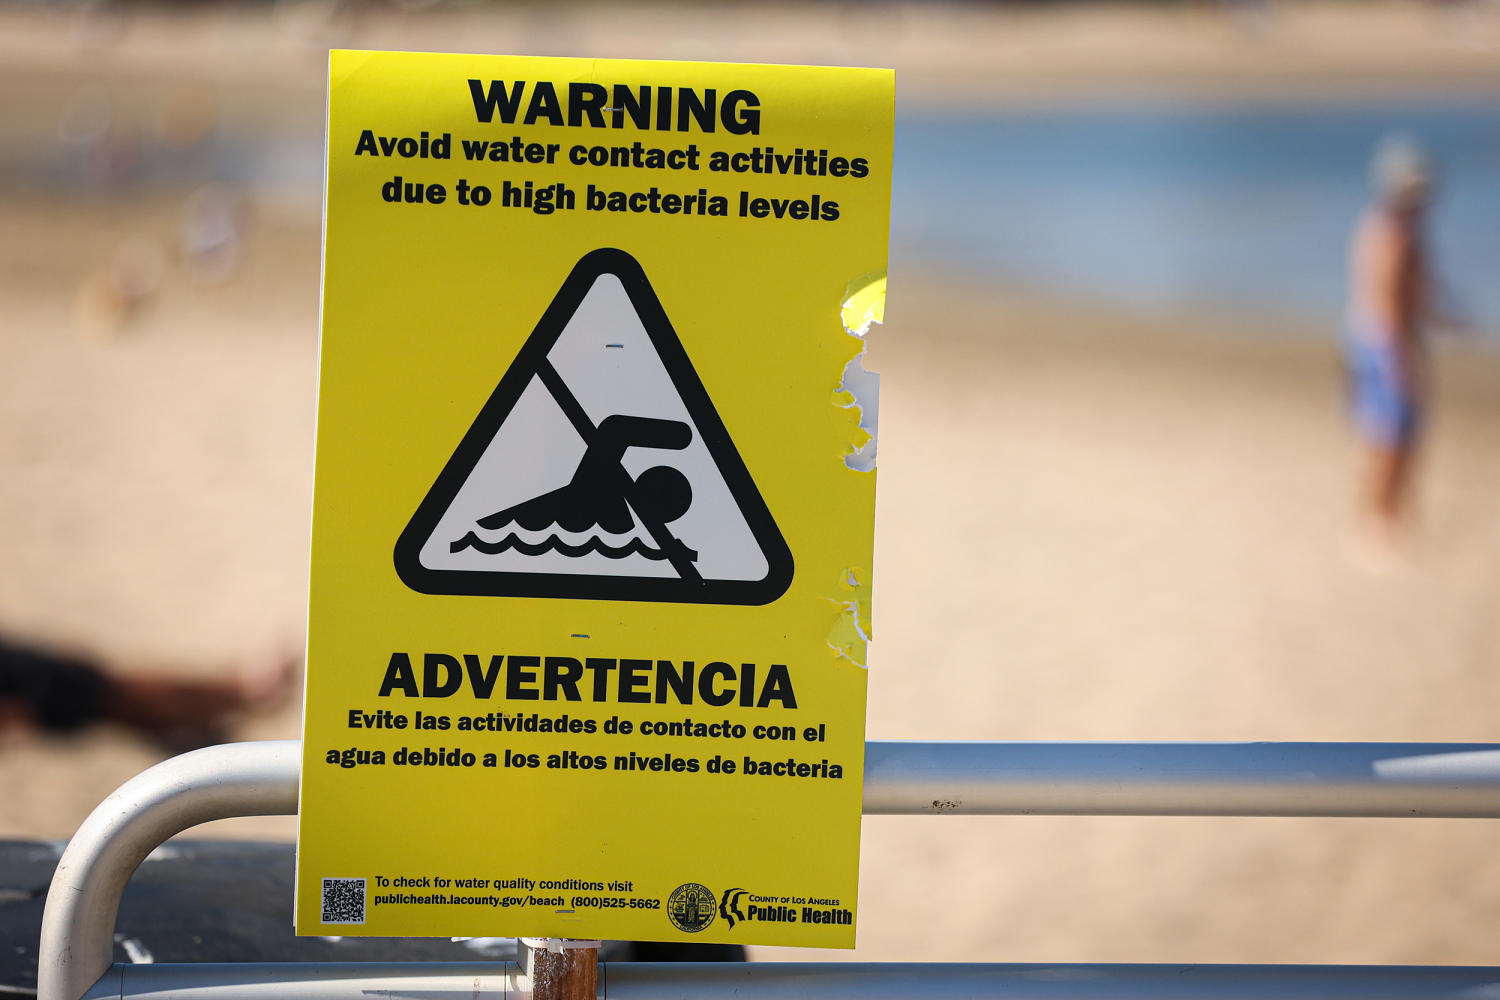 Nearly 100 beaches across the country are closed or have swimming advisories